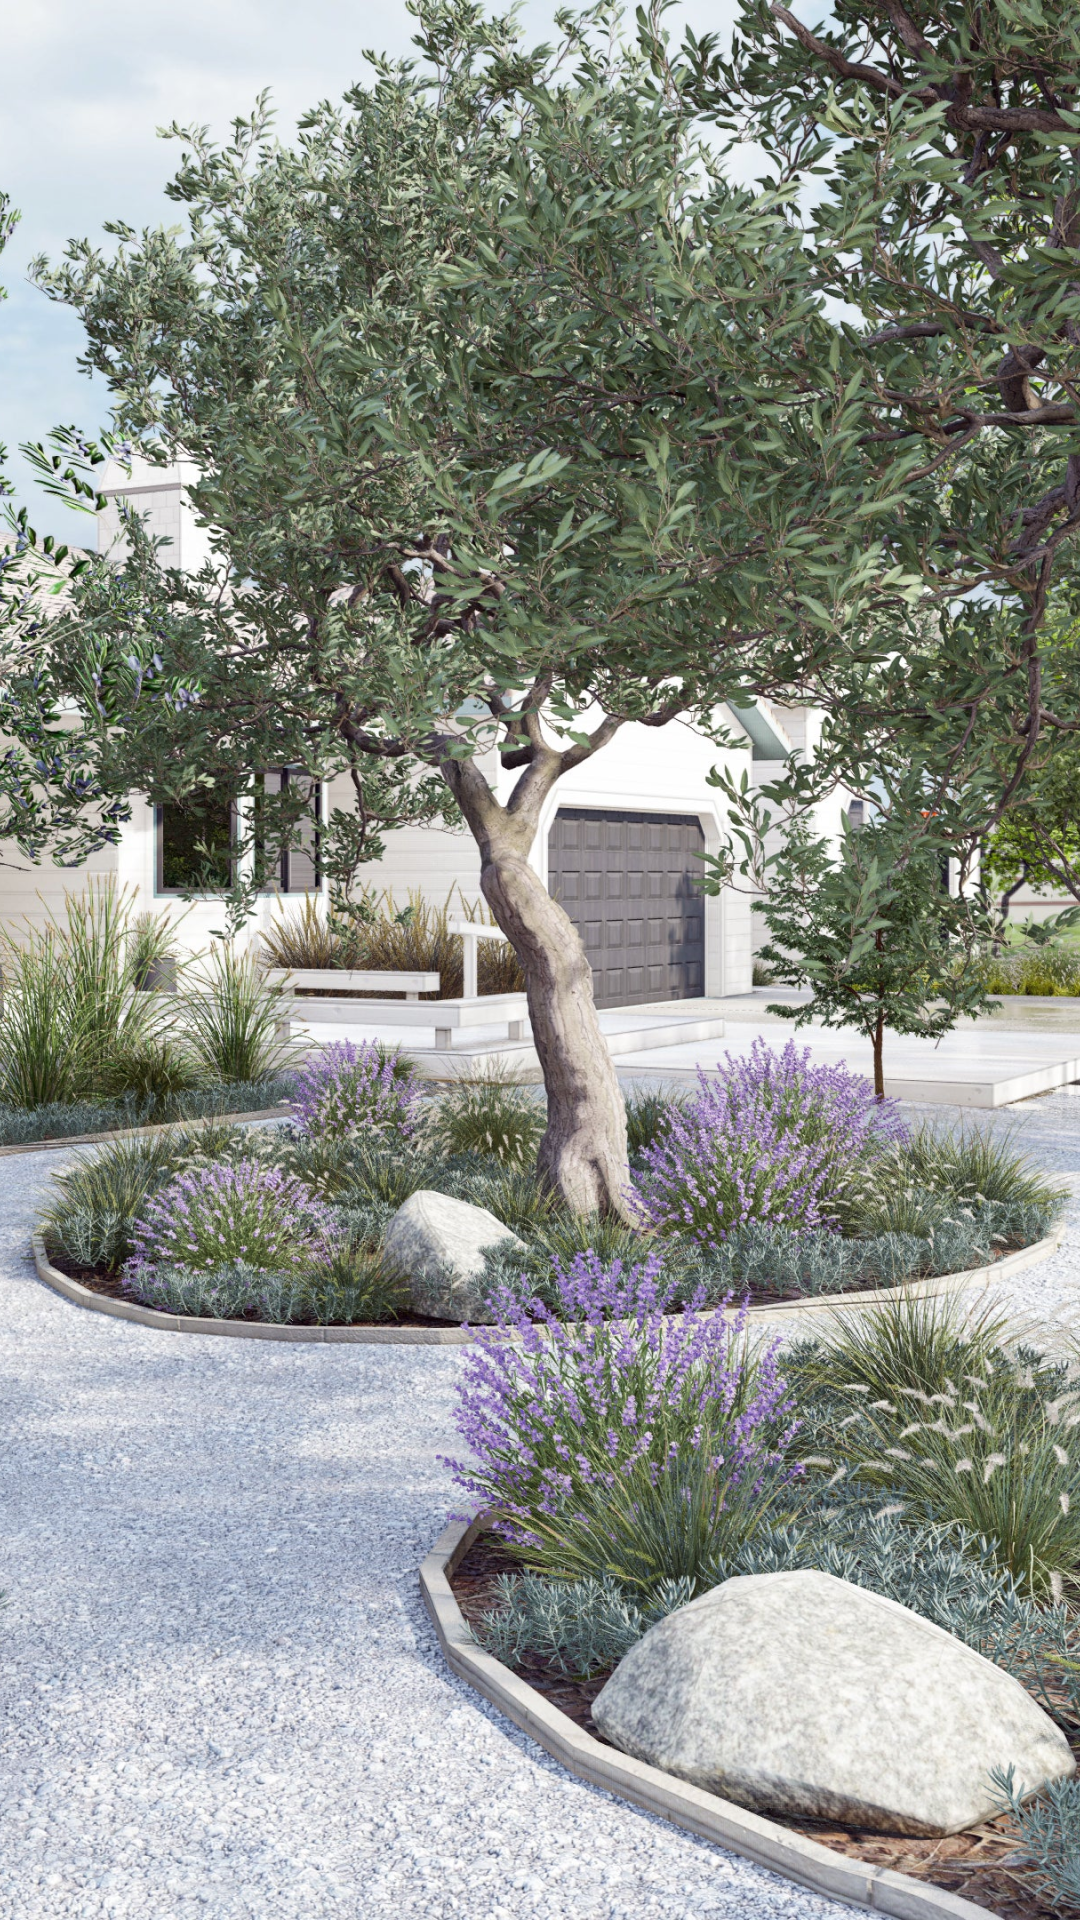 The Art of Creating a Beautiful Outdoor Space: Landscaping Design